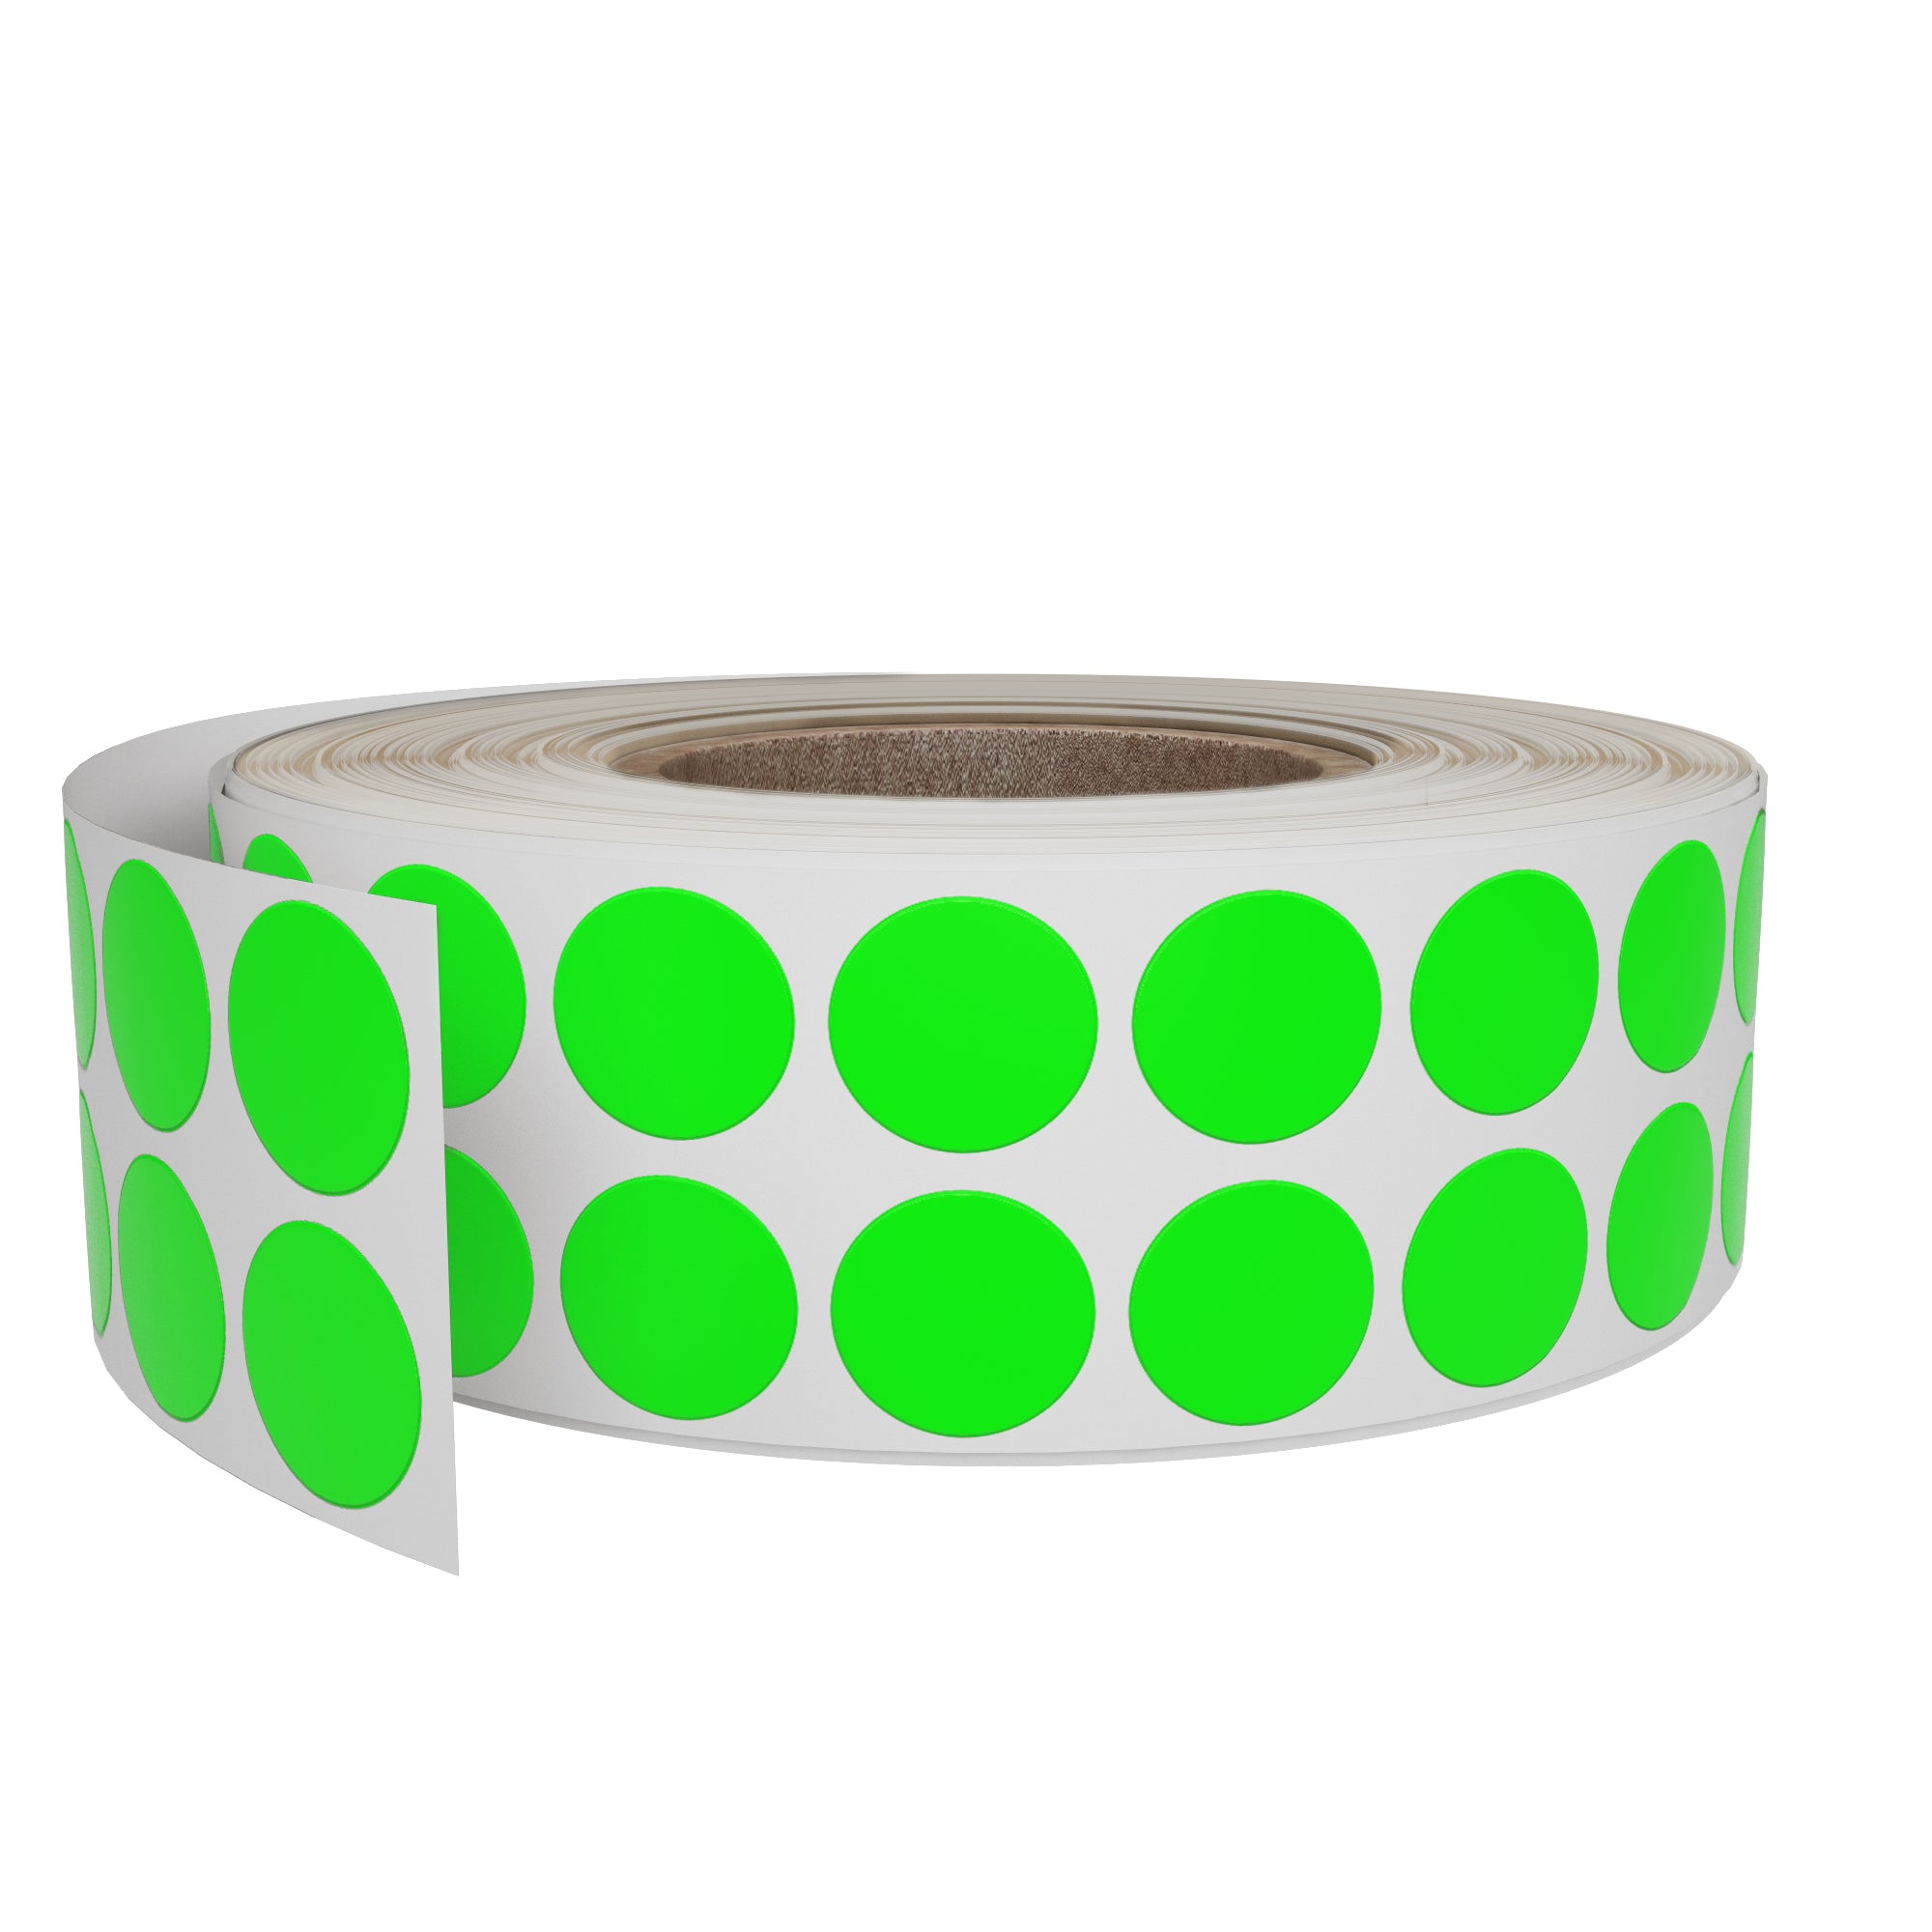 Royal Green Color Coding Dot Stickers in Black 8mm .25 - Circle Dots Labels on A Roll 1/4 - 2000 Pack